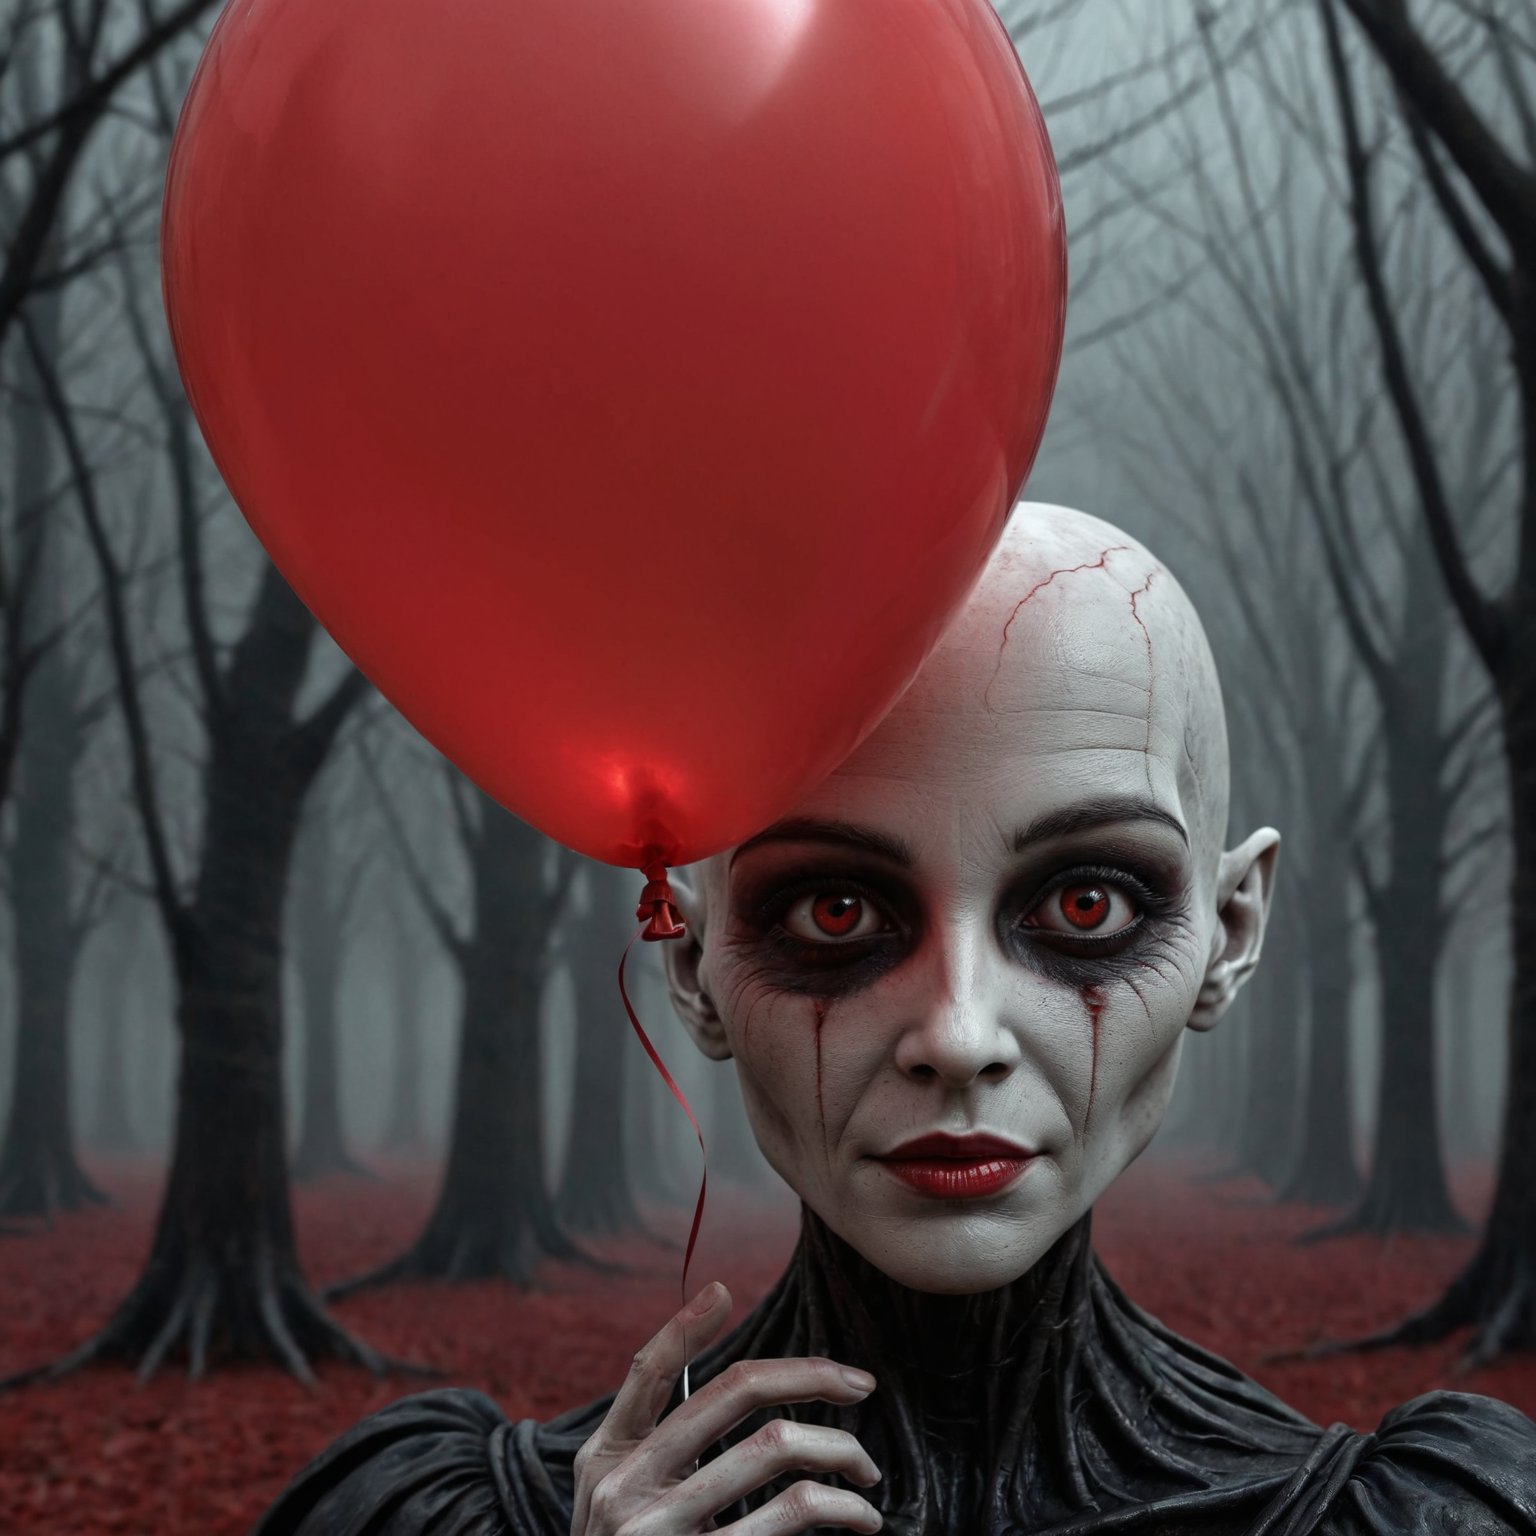 dark aesthetic, A creepy dark humanoid figure, holding a red balloon, scary, eerie, stunning fantasy illustration, dark details, attention to detail, fantasy,